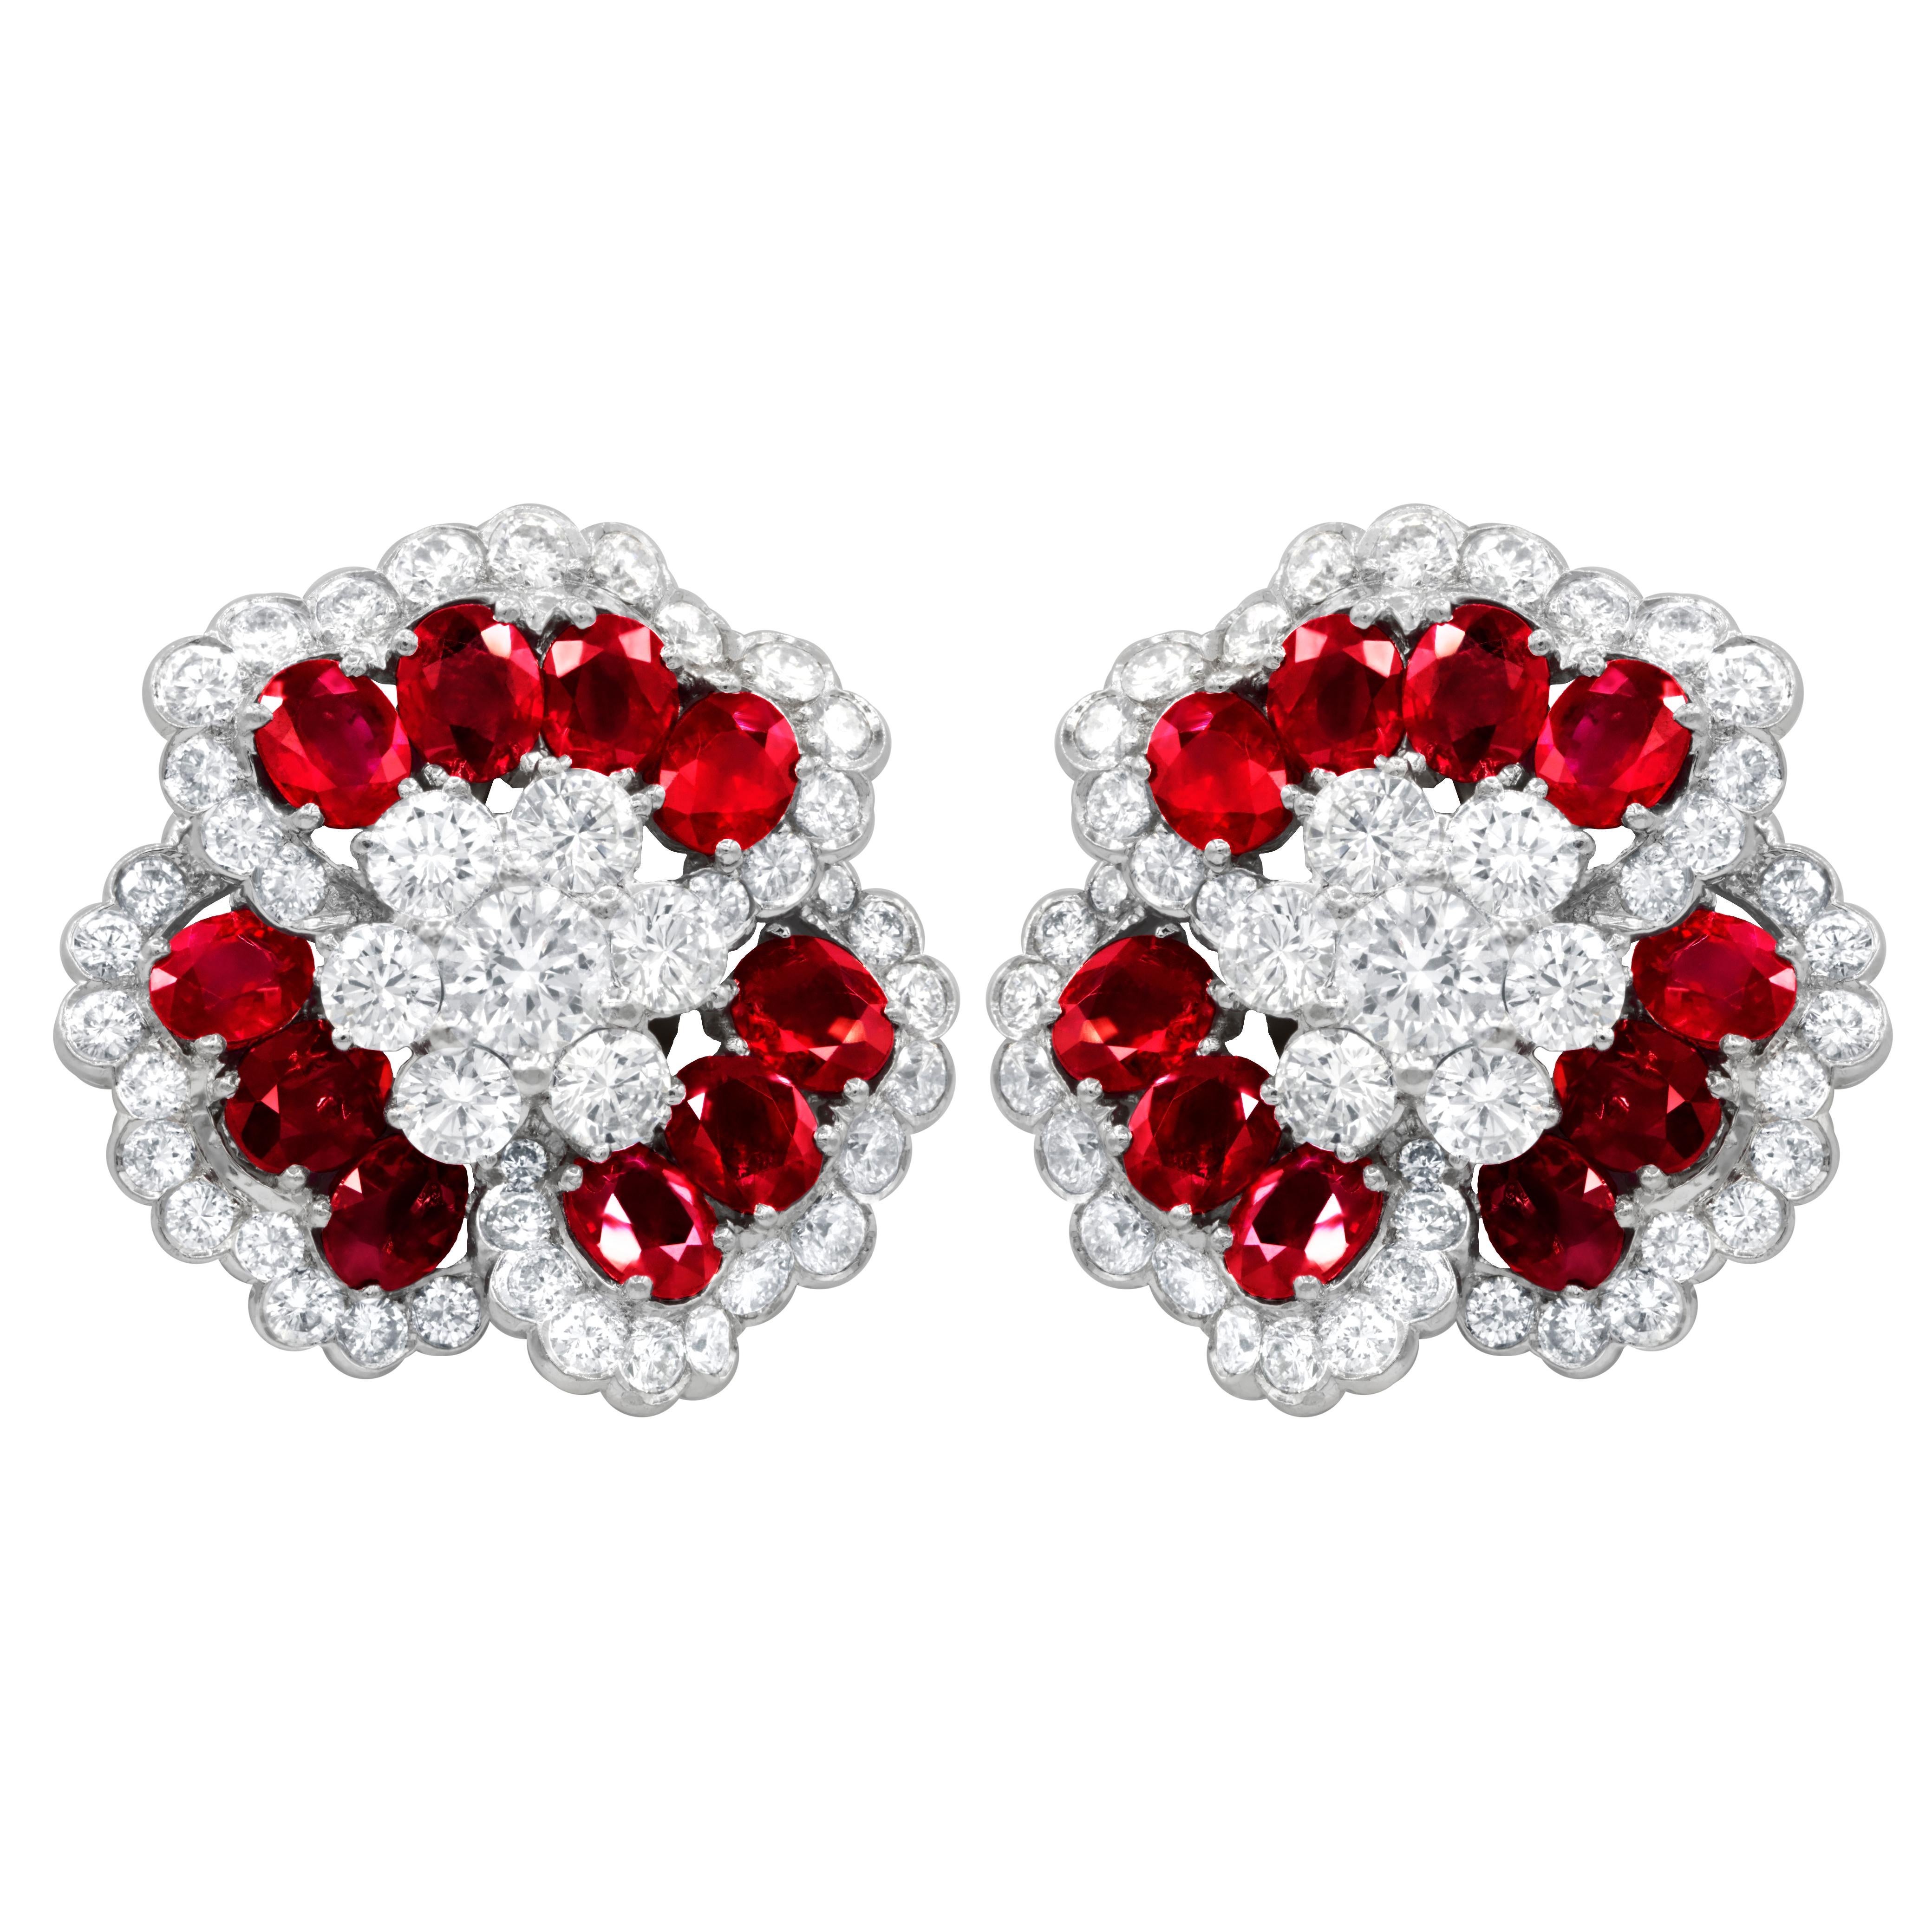 Diana M. Platinum Earrings with Rubies and Diamonds In New Condition For Sale In New York, NY